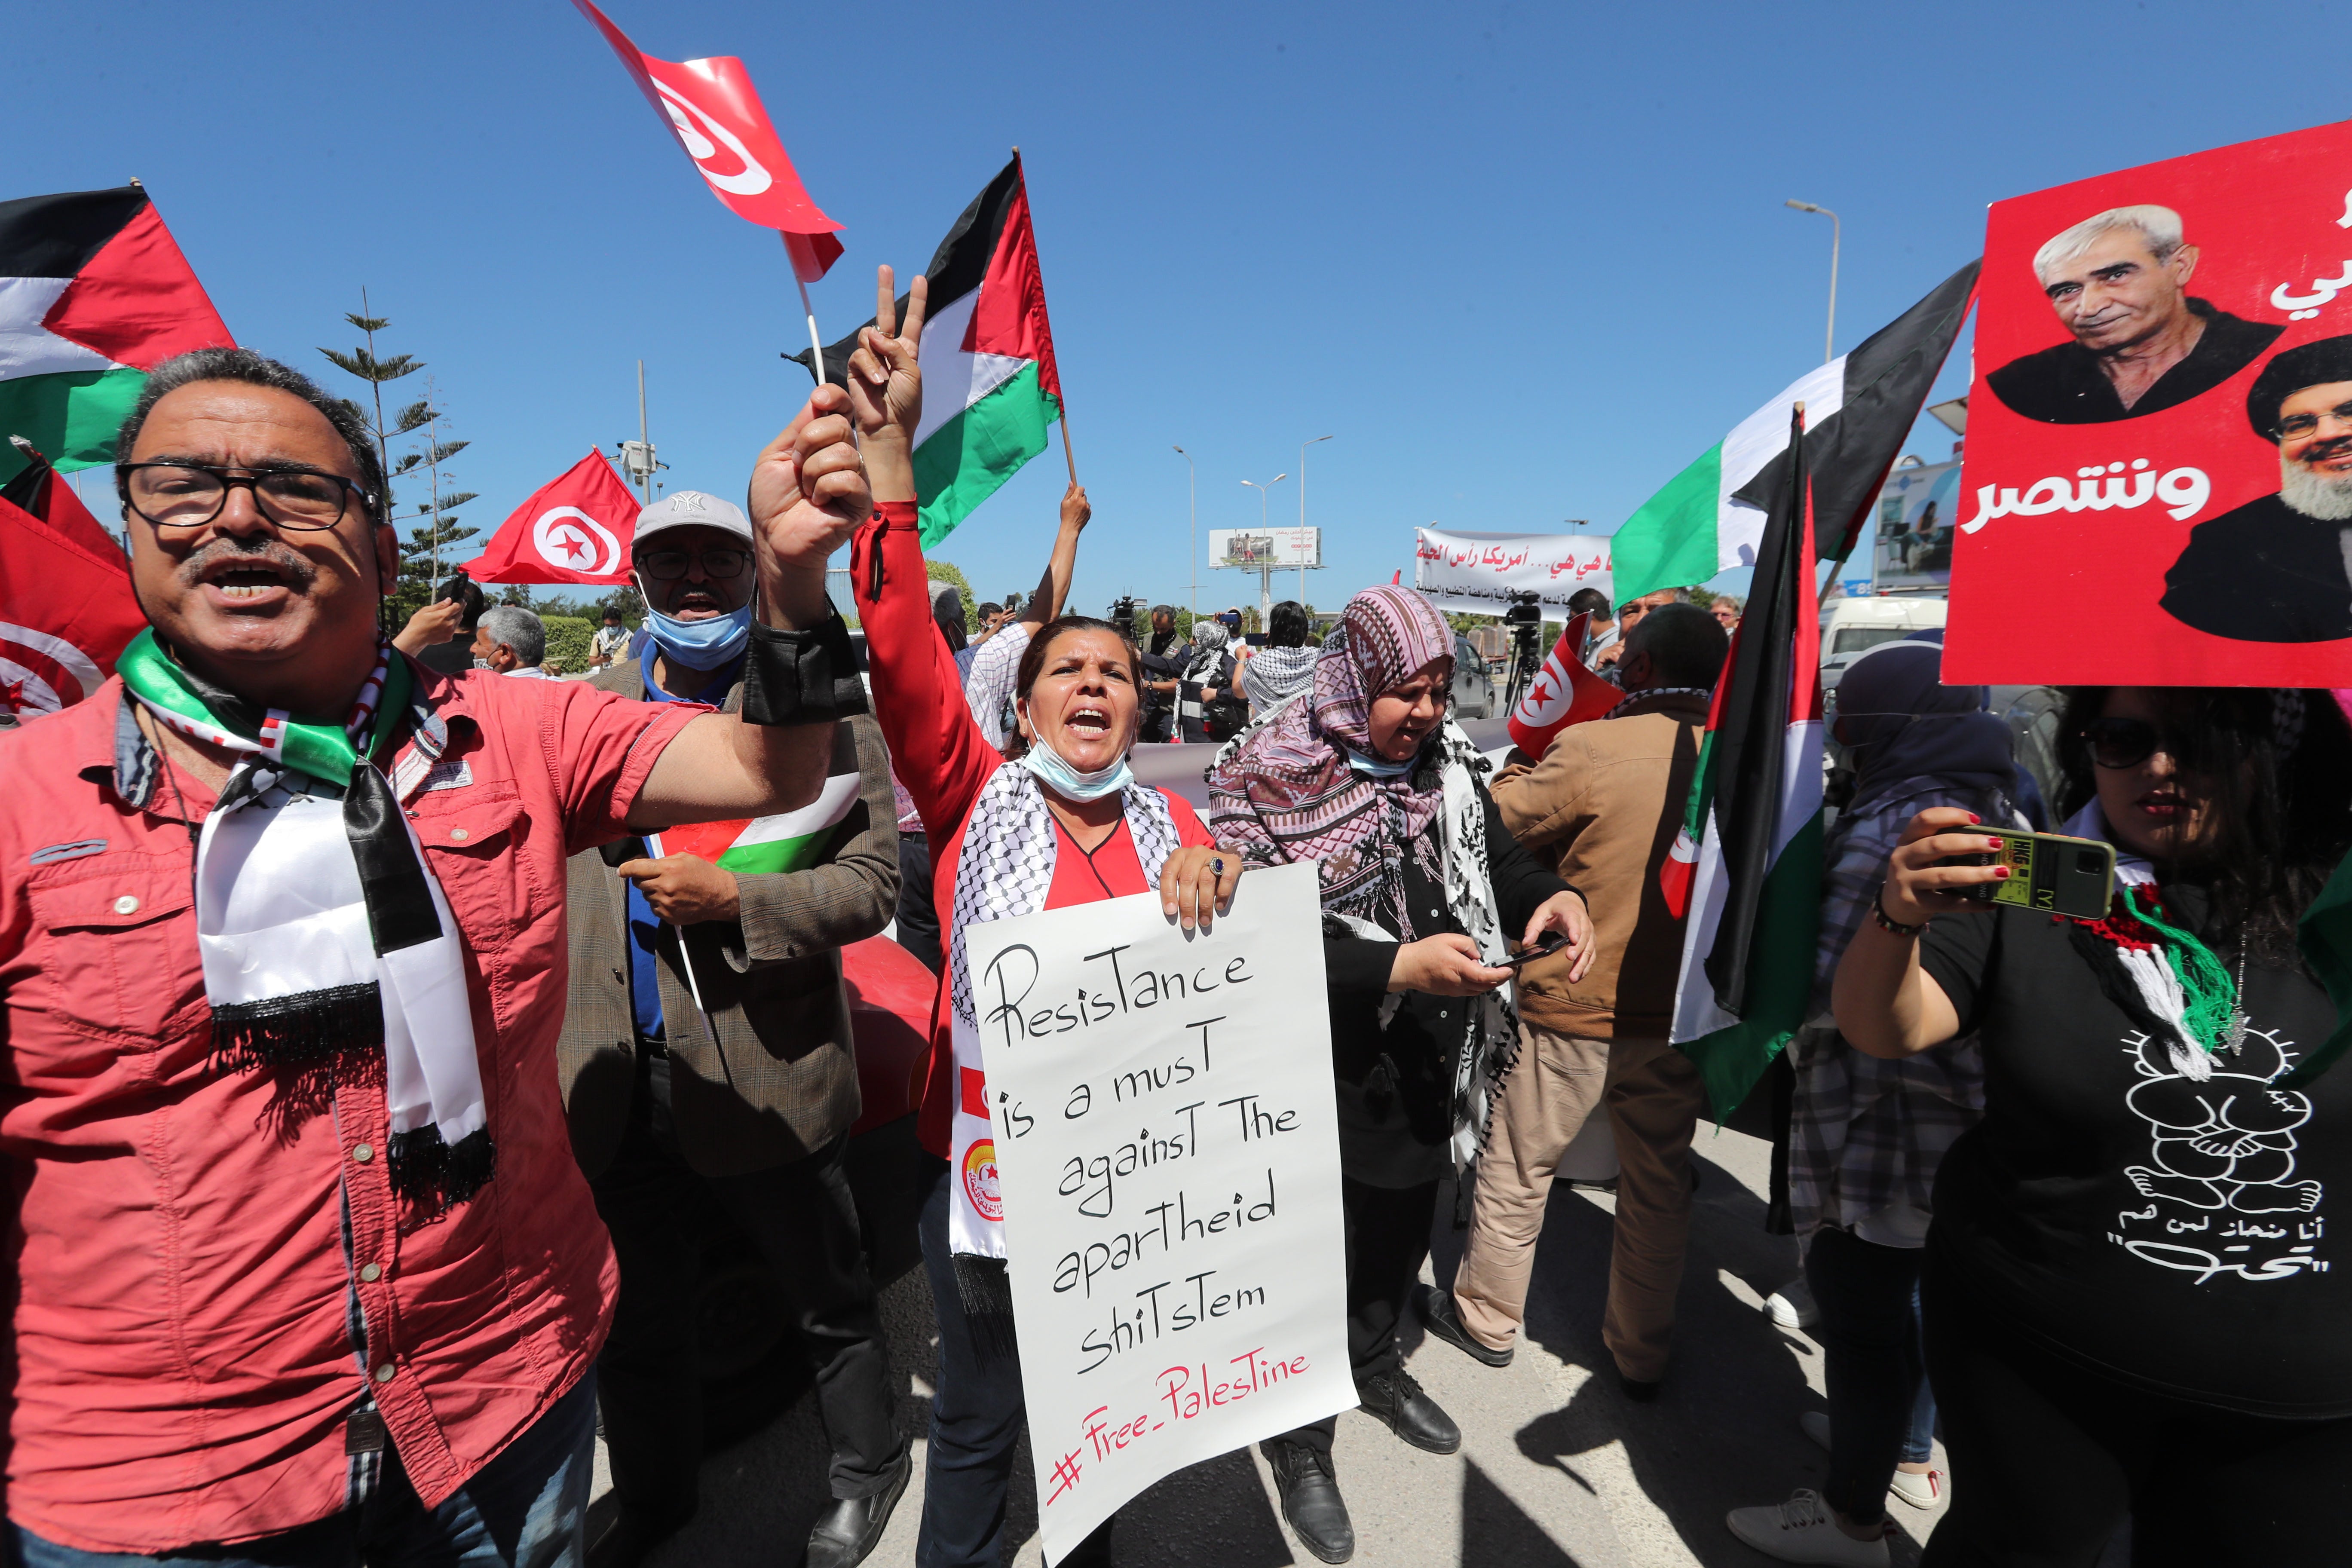 Tunisians wave Palestinian flags and chant anti-Israel slogans during a demonstration in solidarity with Palestine